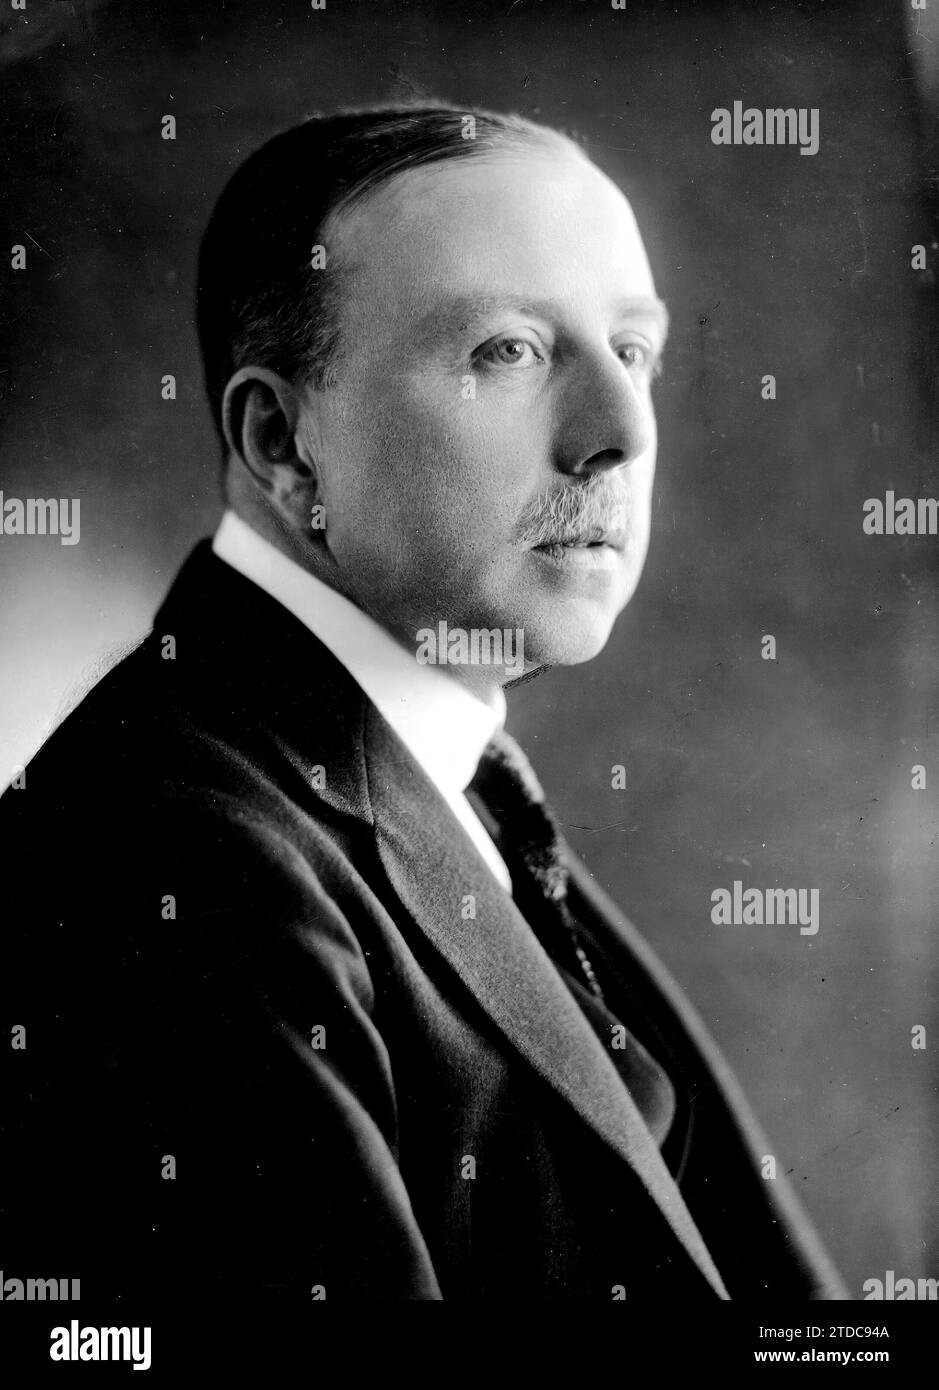 11/08/1921. Don Luis Aldunate Echeverría, Minister of Foreign Affairs of Chile, recently appointed representative of his country in Spain. Credit: Album / Archivo ABC Stock Photo